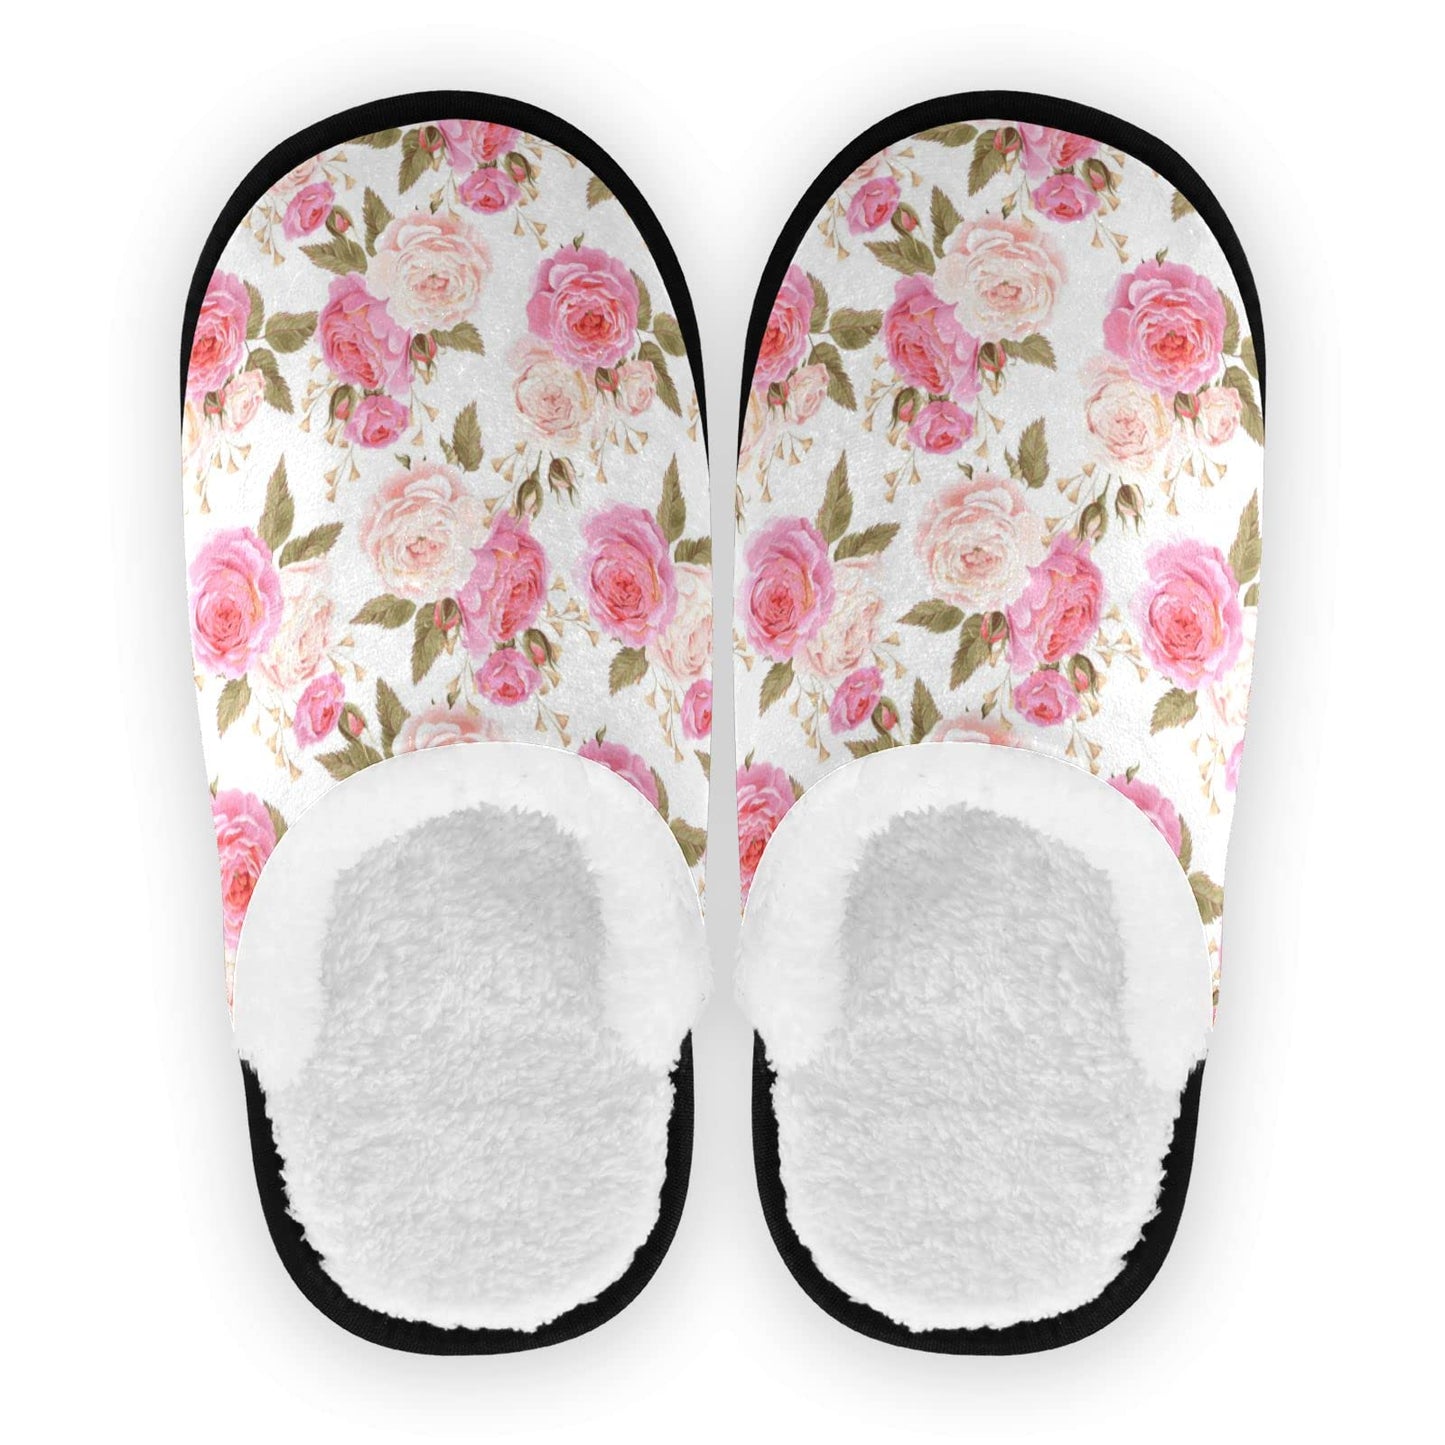 Rose Flower Floral Spa Slippers House Slippers Memory Foam Slippers Indoor Outdoor Non-Slip Home Shoes L for Men Woman